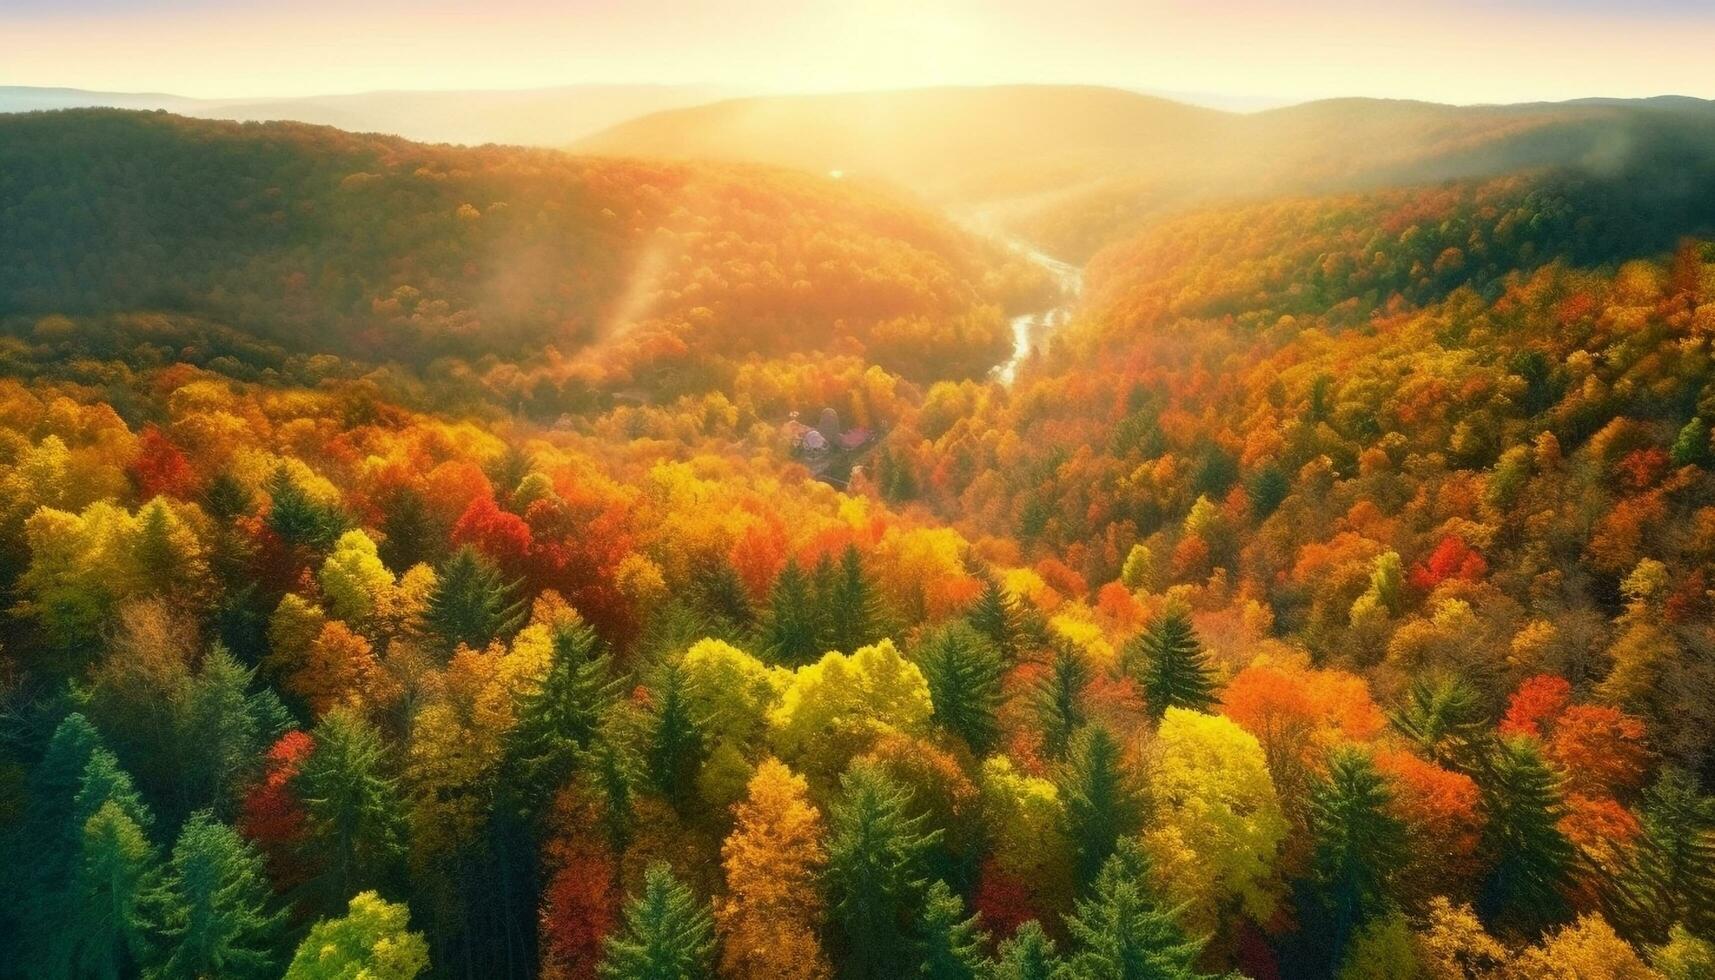 Vibrant autumn landscape yellow, orange, and green leaves on trees generated by AI photo